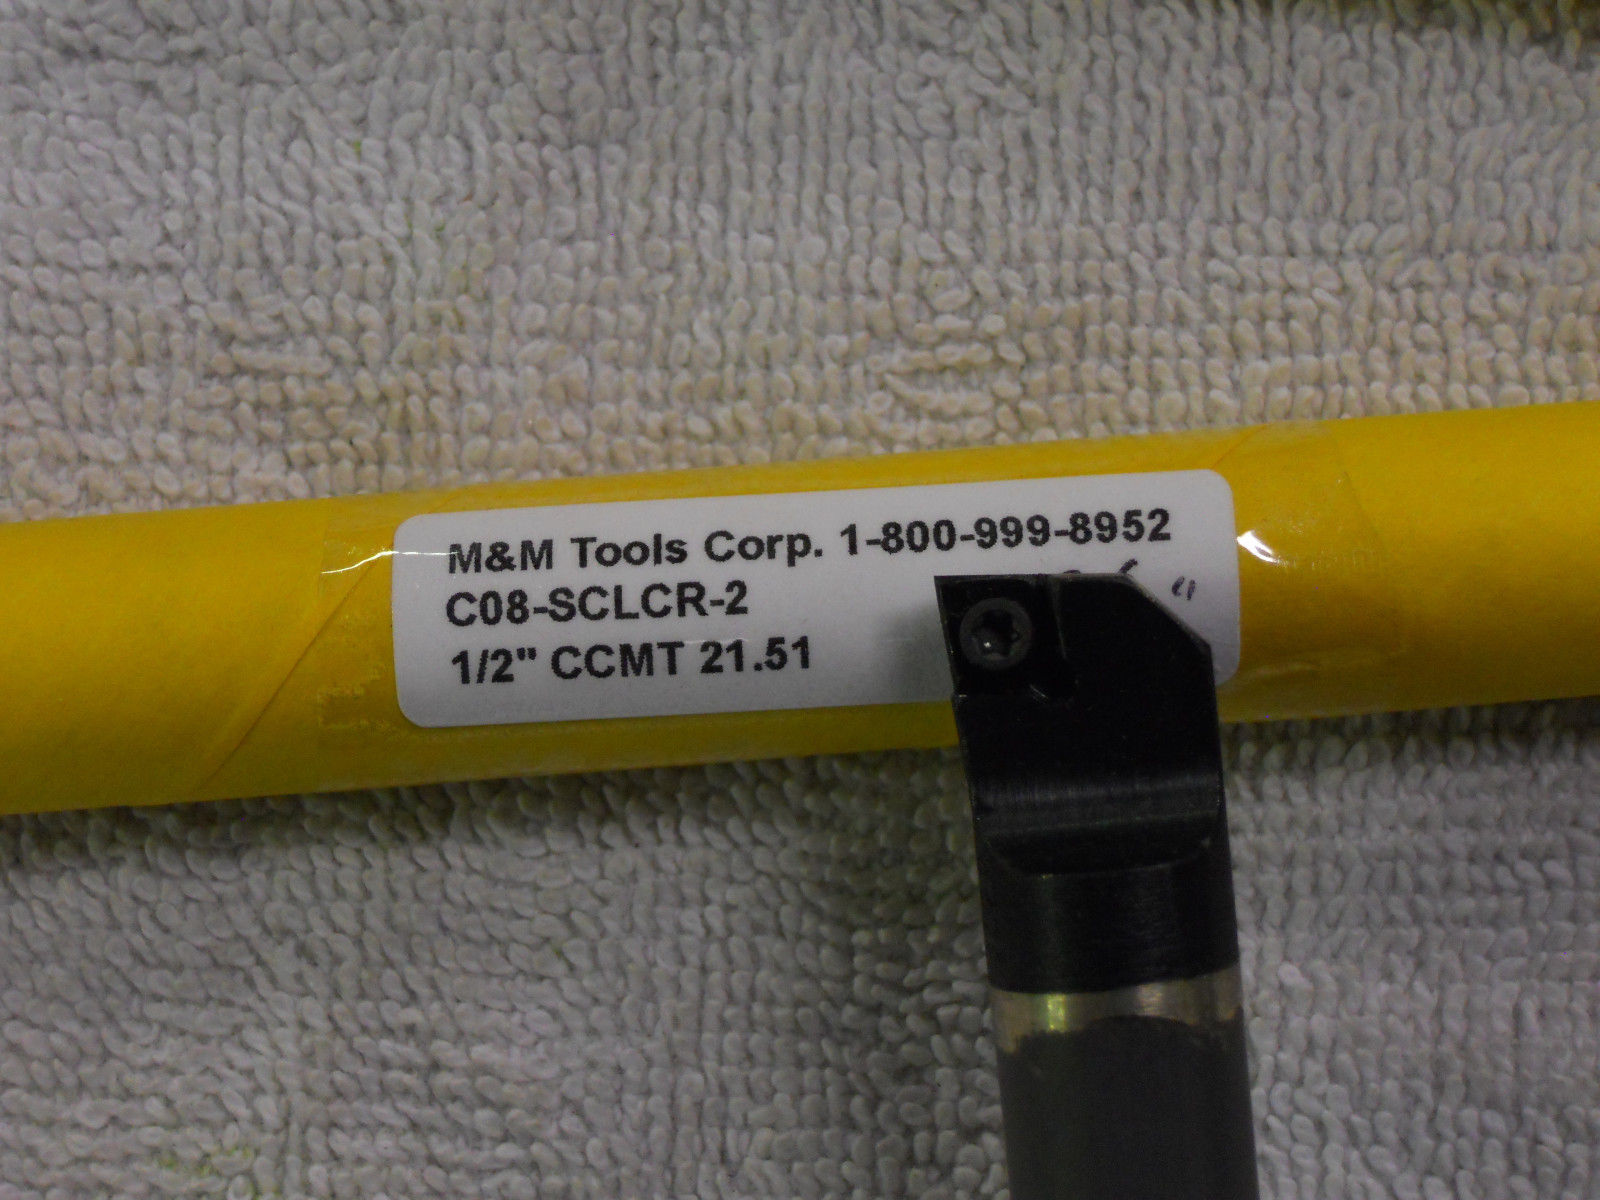 1 NEW 5/16" CARBIDE BORING BAR TAKES CCMT 21.51 INSERT OAL 4-1/8" W/ COOL {A651}